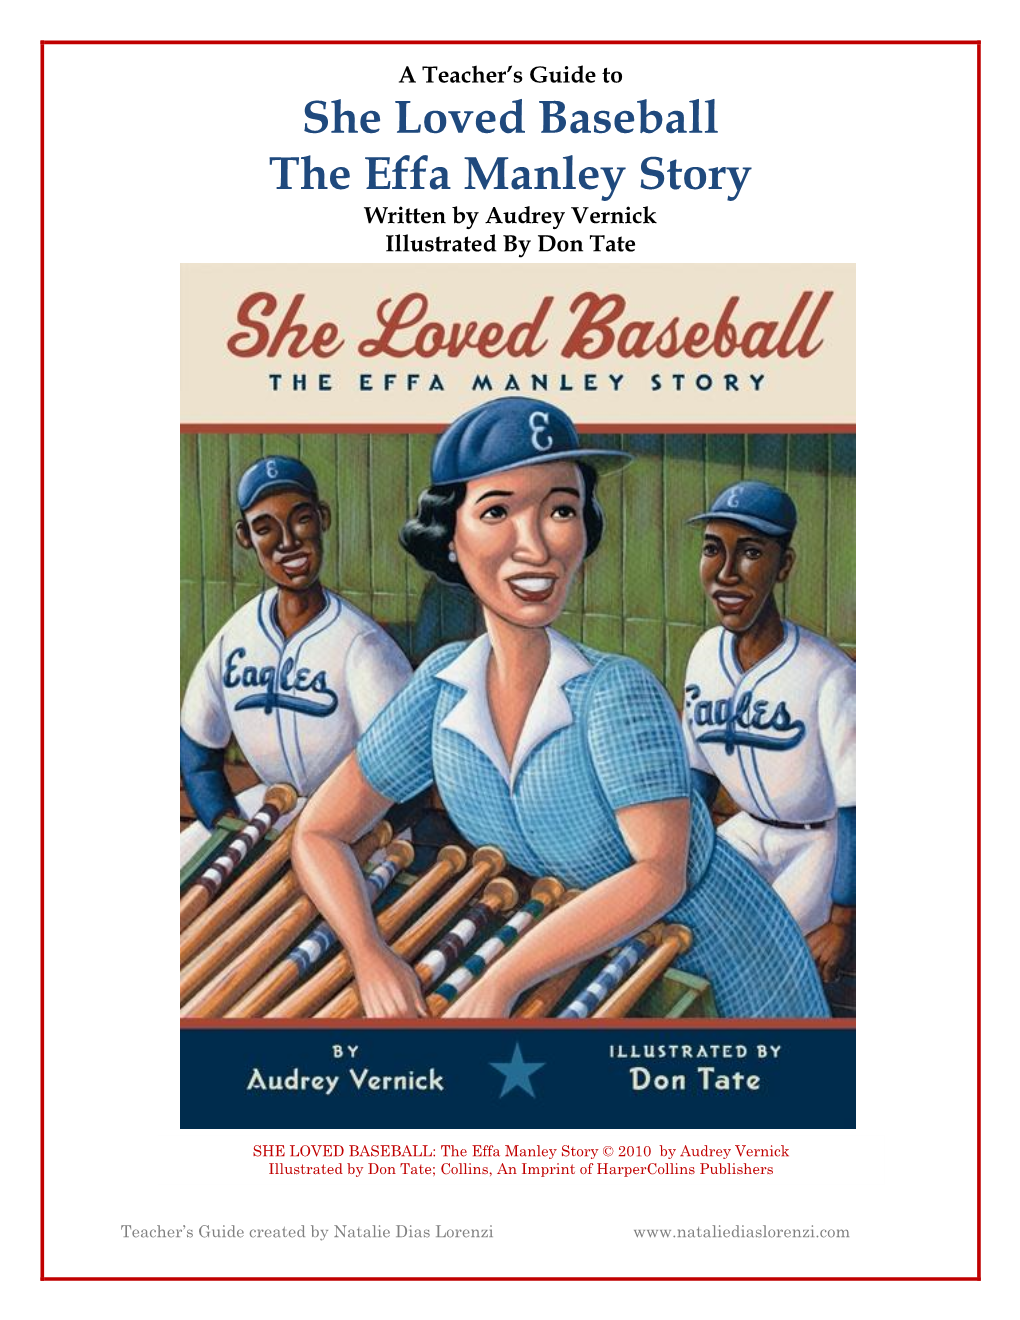 She Loved Baseball the Effa Manley Story Written by Audrey Vernick Illustrated by Don Tate